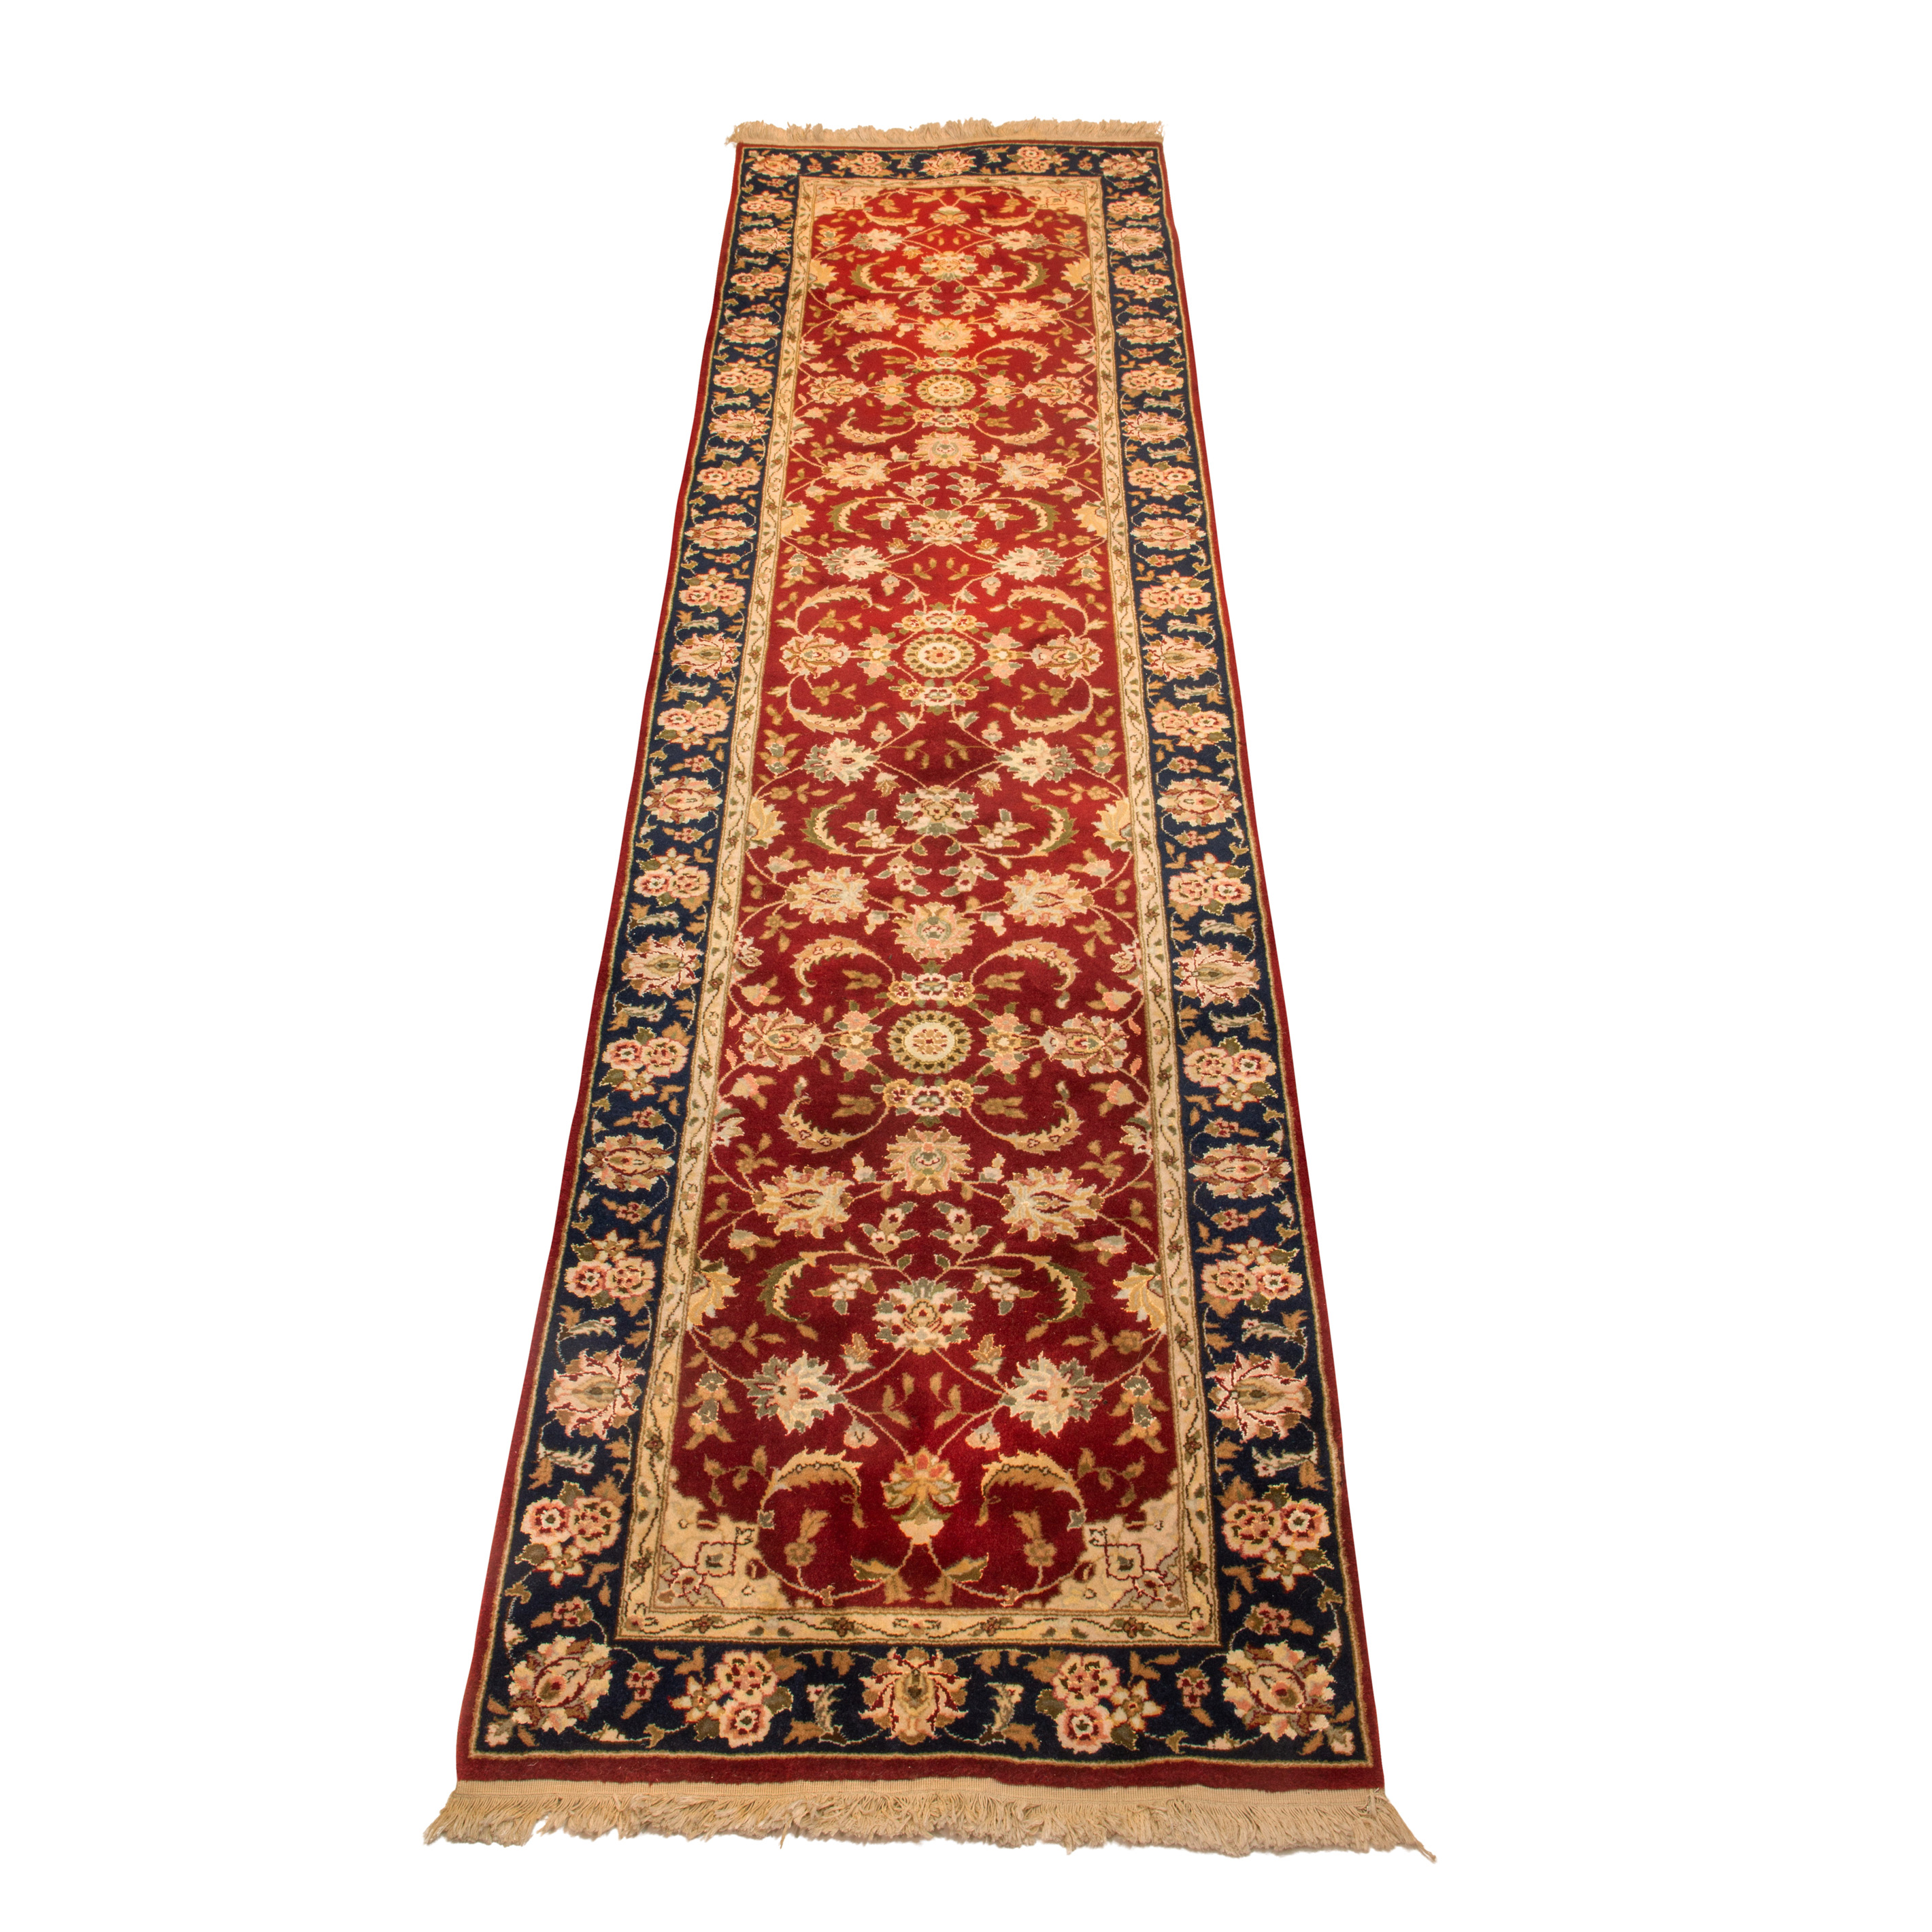 A SILK AND WOOL RUNNER A Silk and